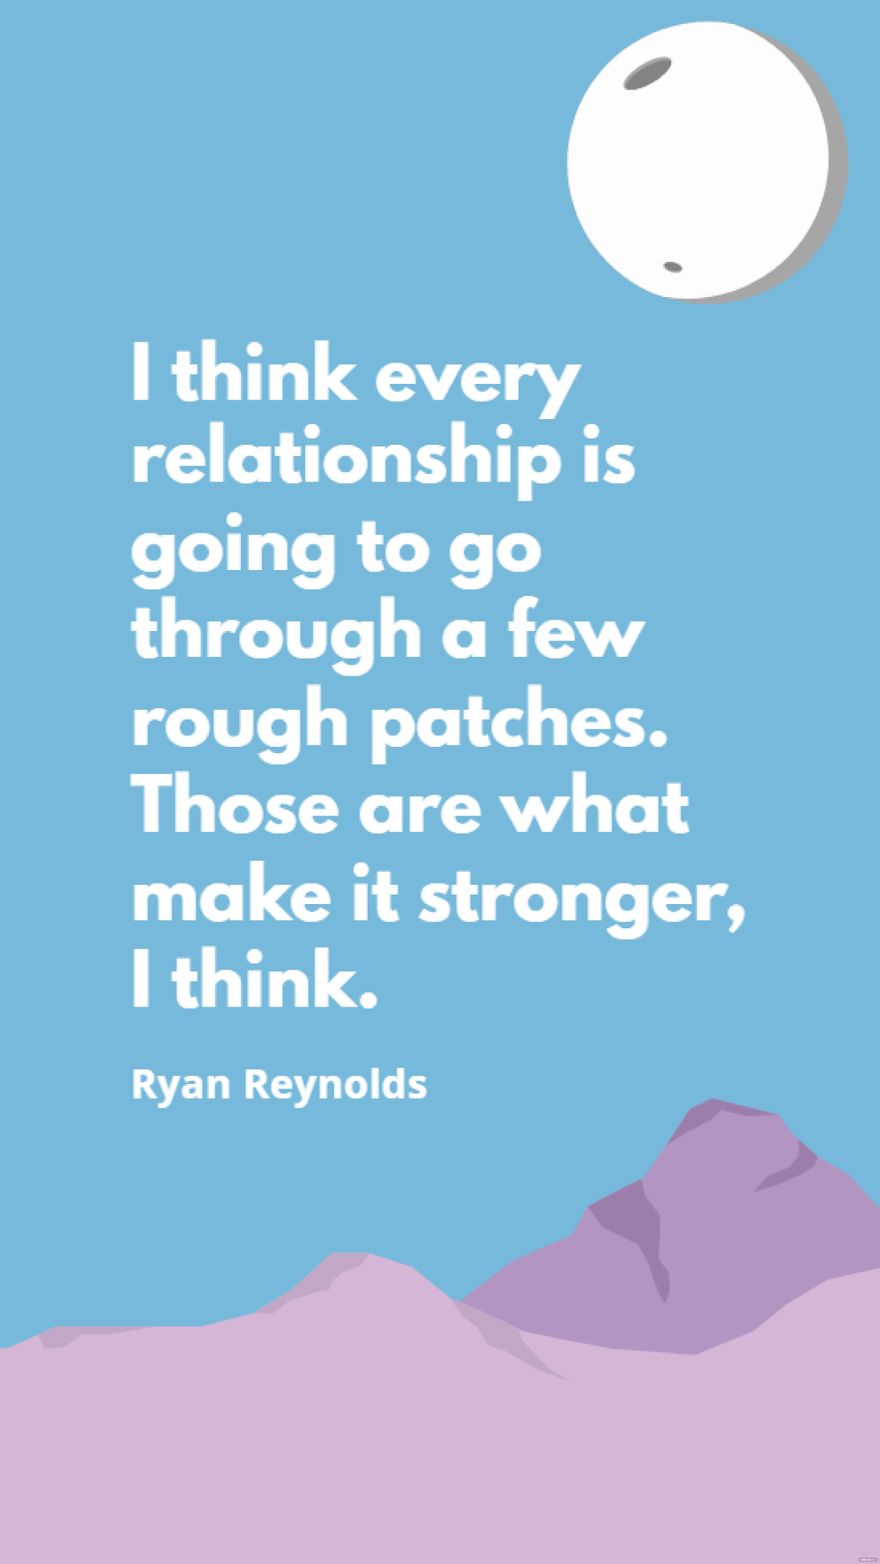 Ryan Reynolds - I think every relationship is going to go through a few rough patches. Those are what make it stronger, I think.